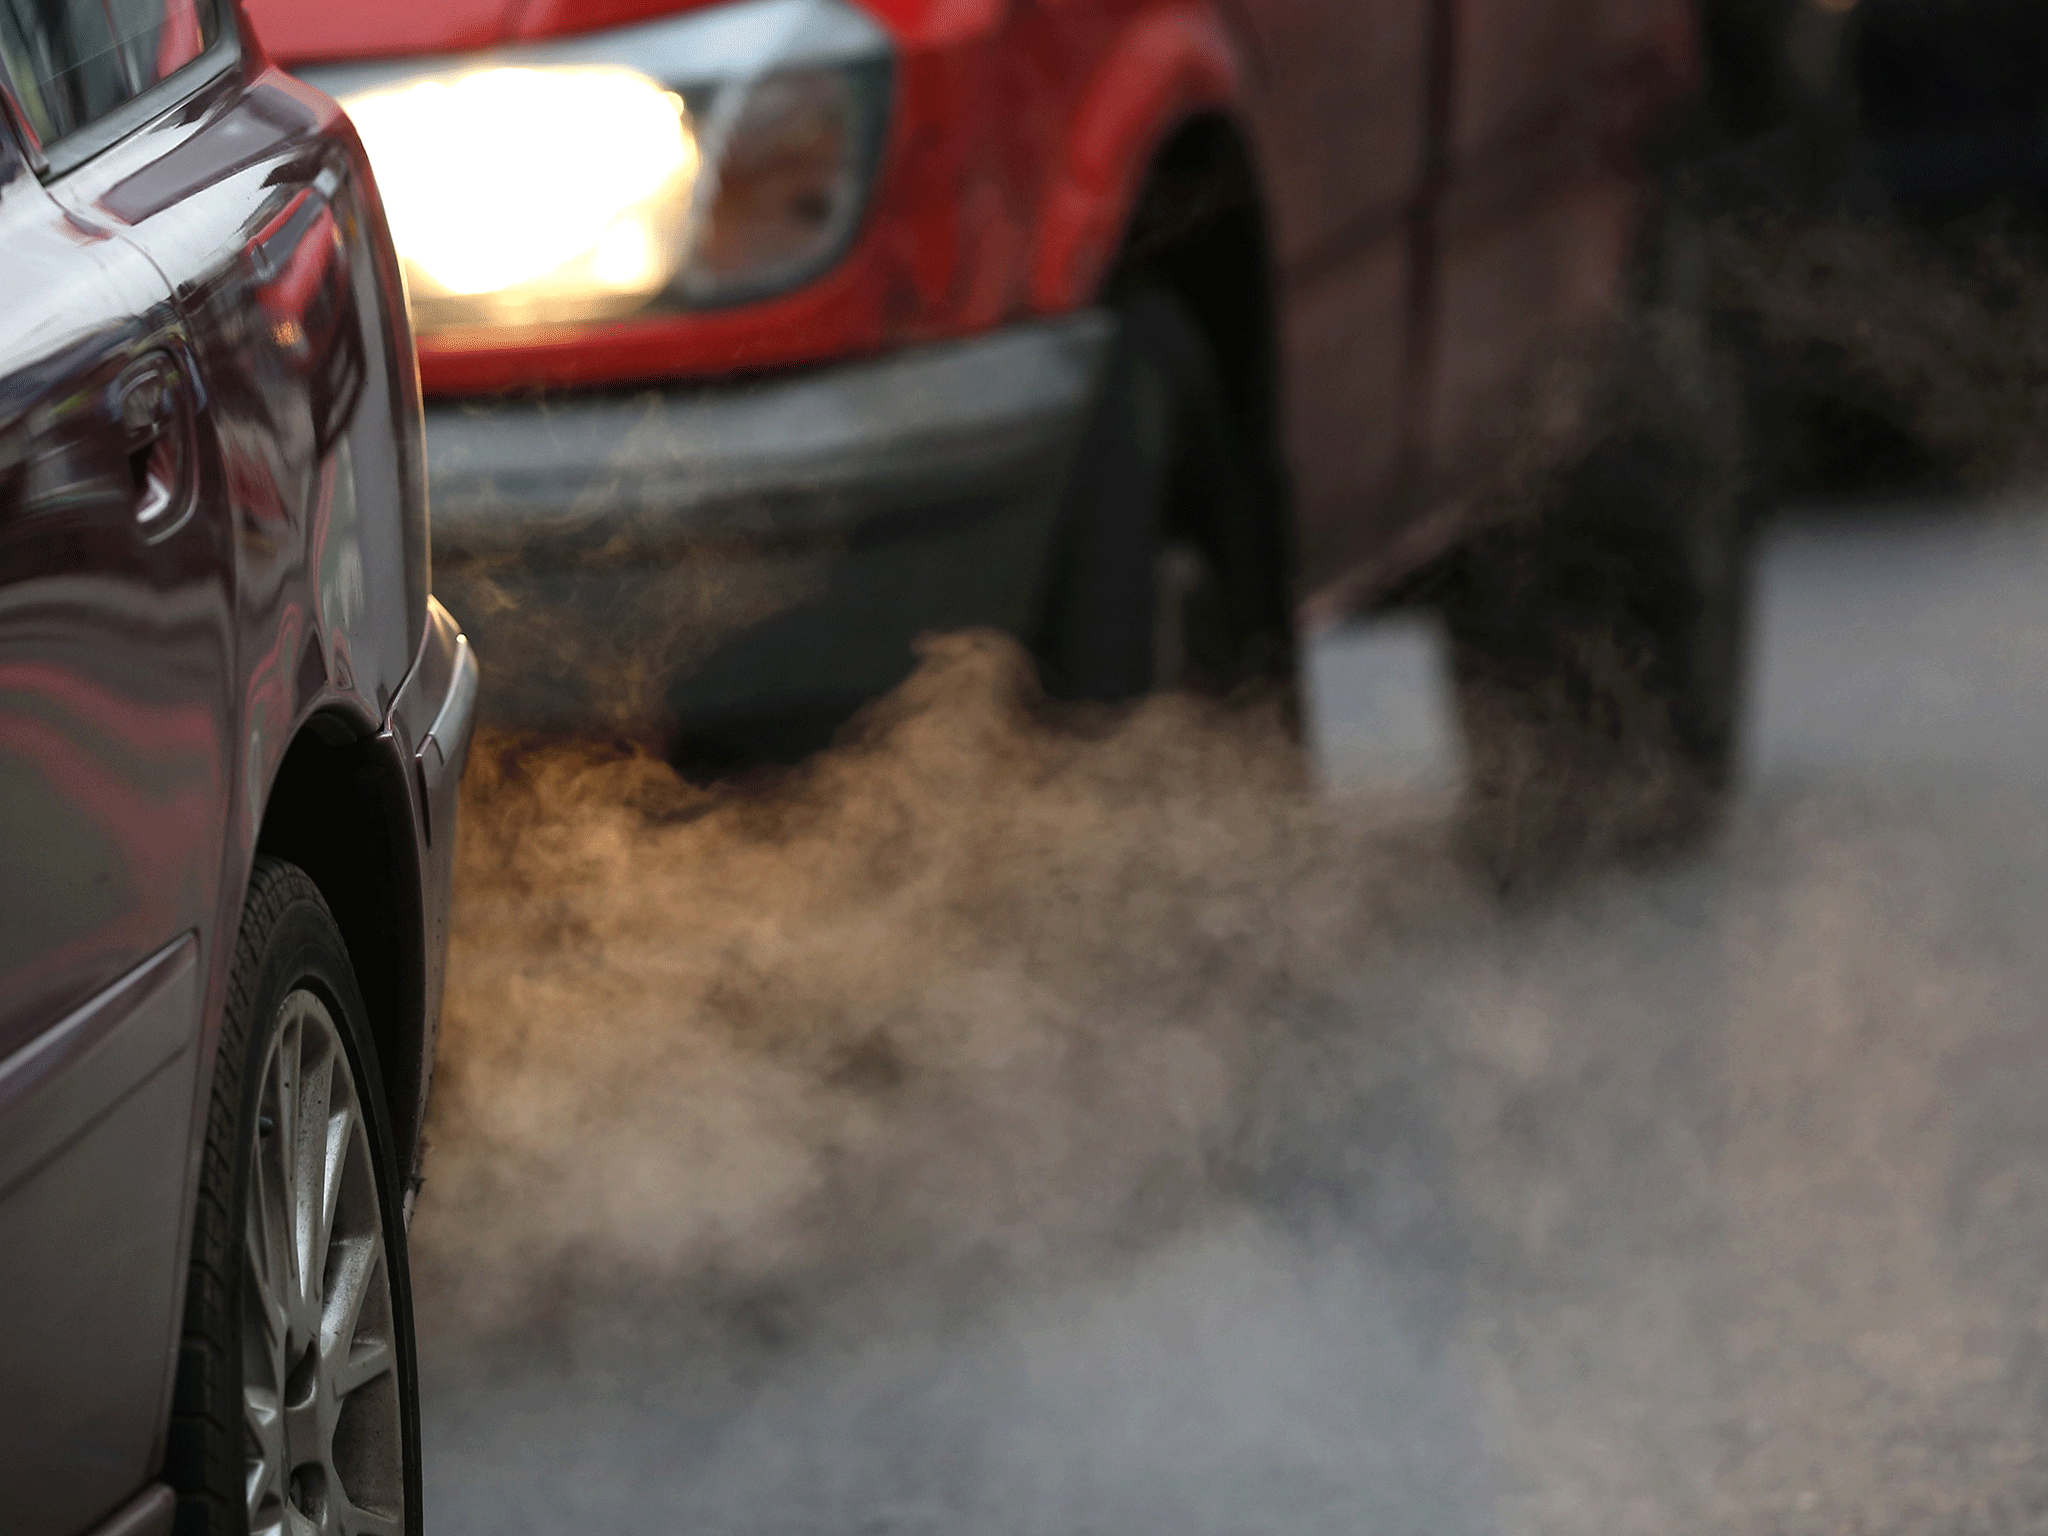 Pressure is growing on London drivers to junk polluting vehicles for greener alternatives